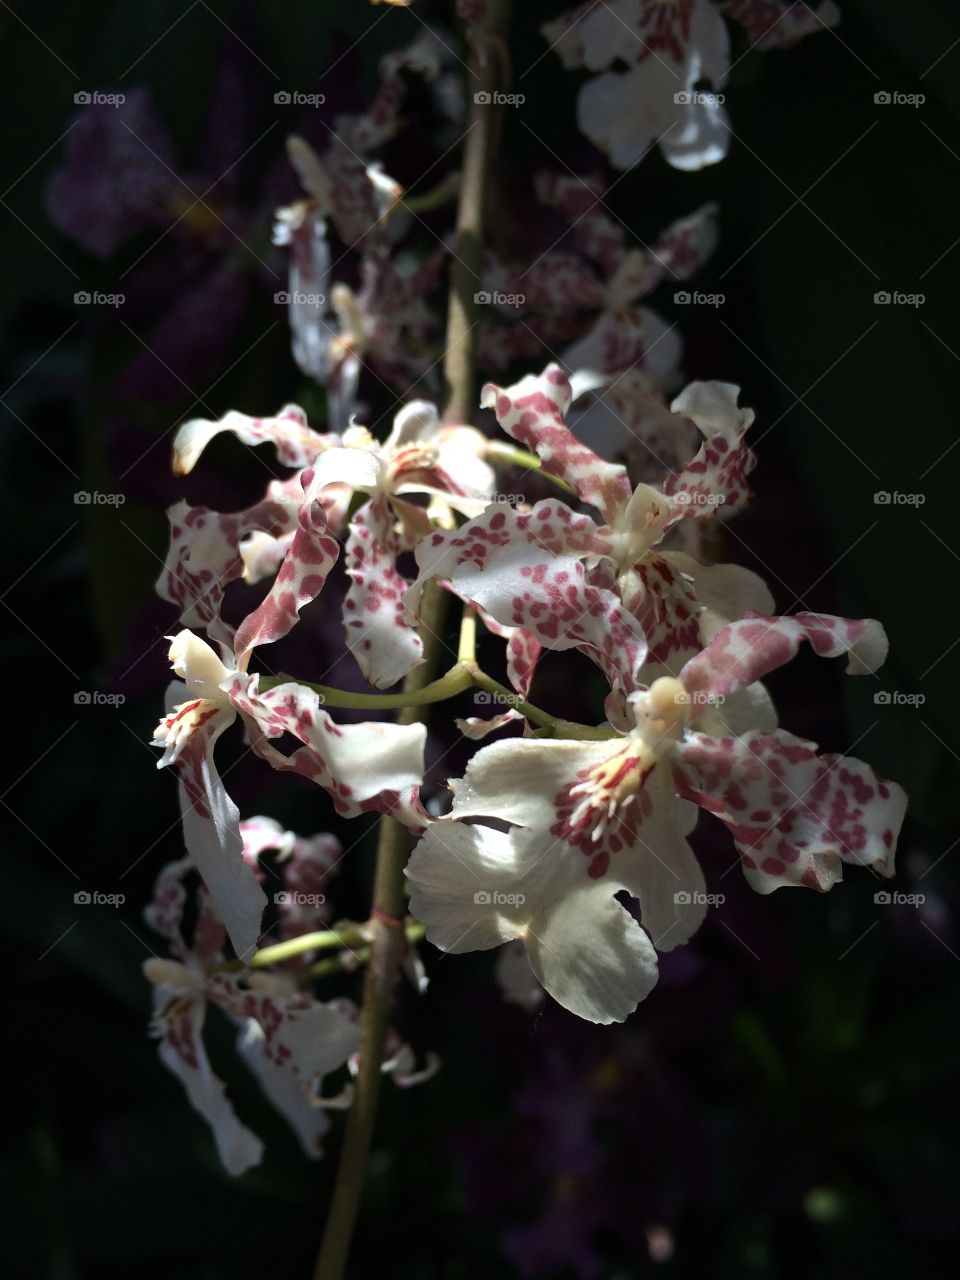 Dancing Orchids 